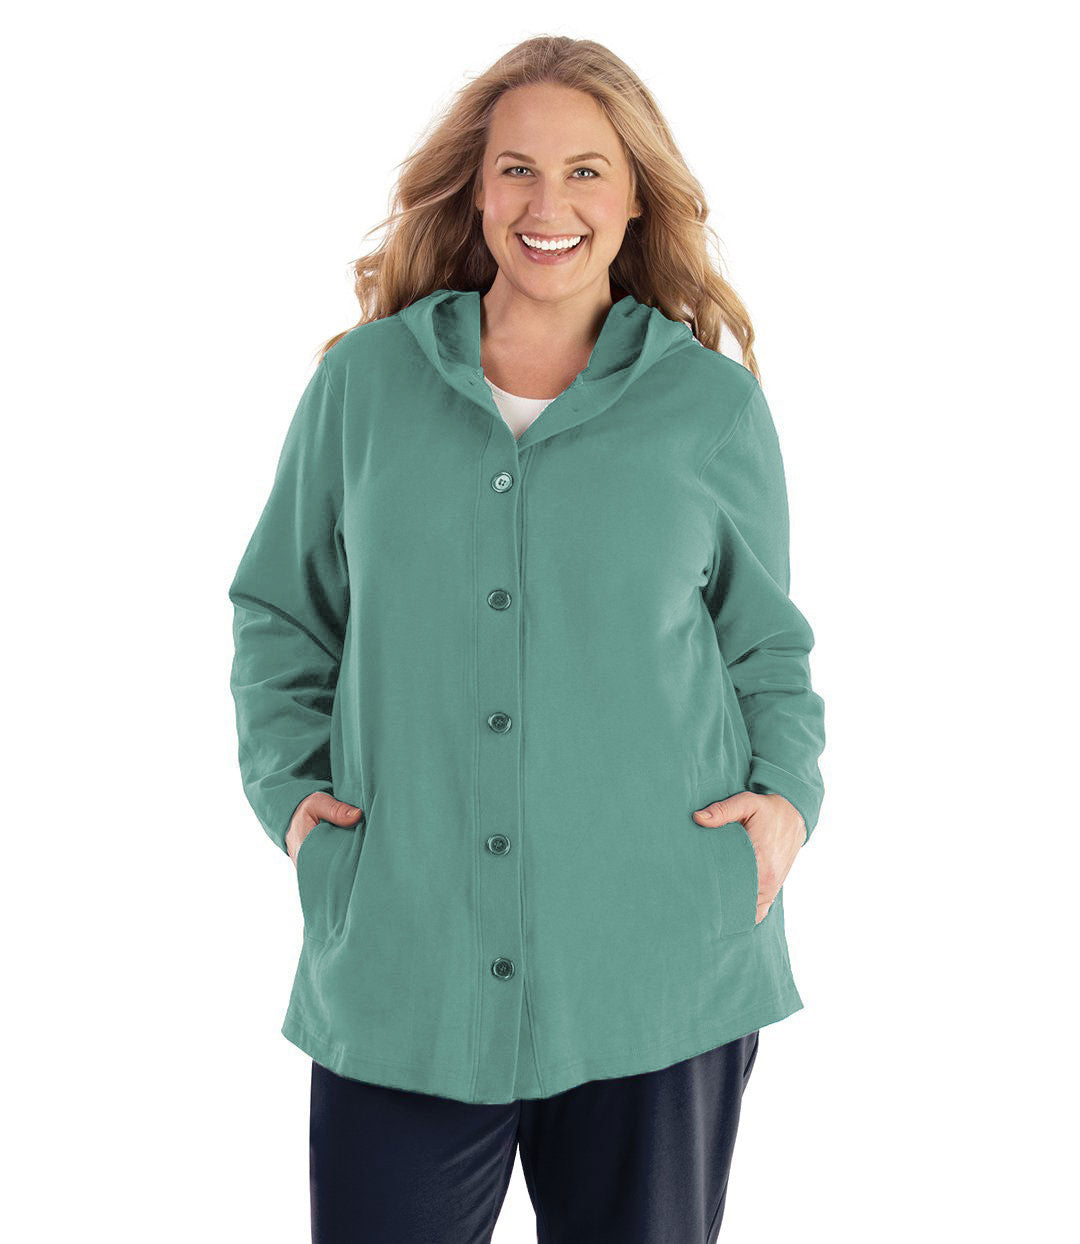 Plus size woman wearing Legacy Cotton Casual Button Up Hoodie in Lichen Green. Both hands are in side pockets of hoodie.